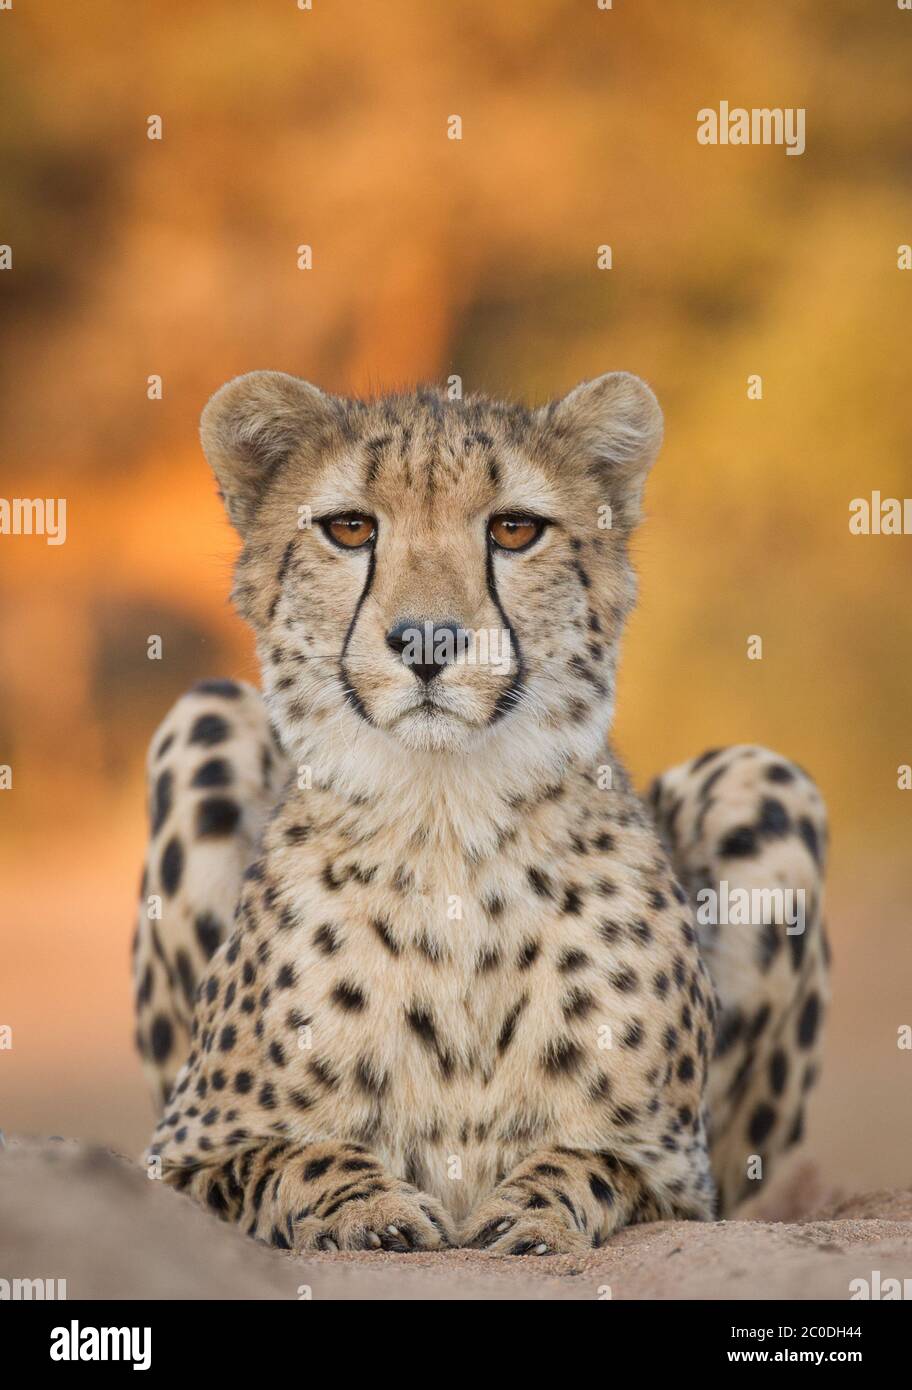 A vertical portrait of one adult cheetah sitting on sand looking straight at camera head on in Kruger Park South Africa Stock Photo